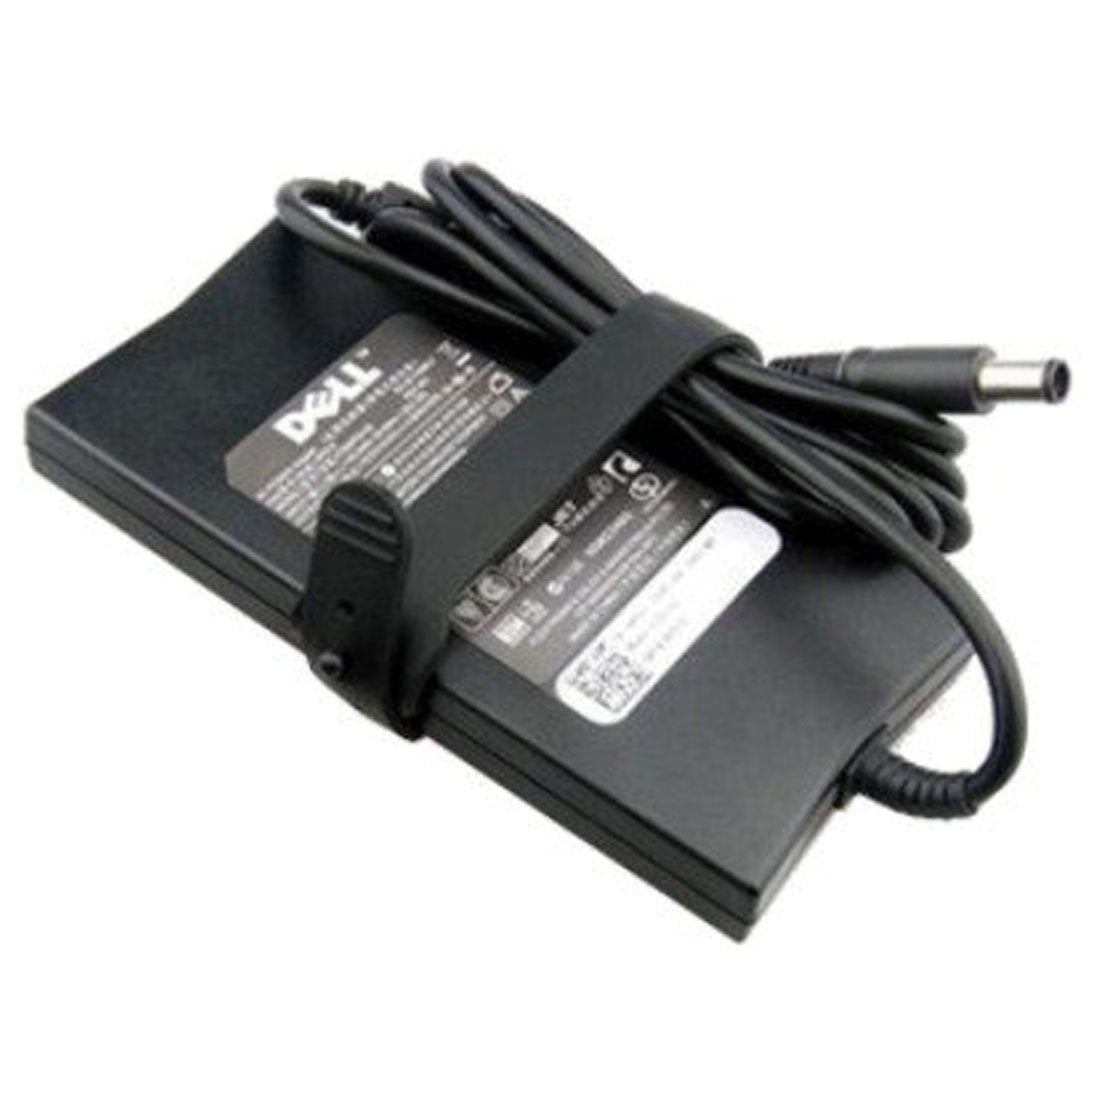 Dell Original 130W 19.5V 7.4mm Pin Laptop Charger Adapter for Latitude 2100 With Power Cord